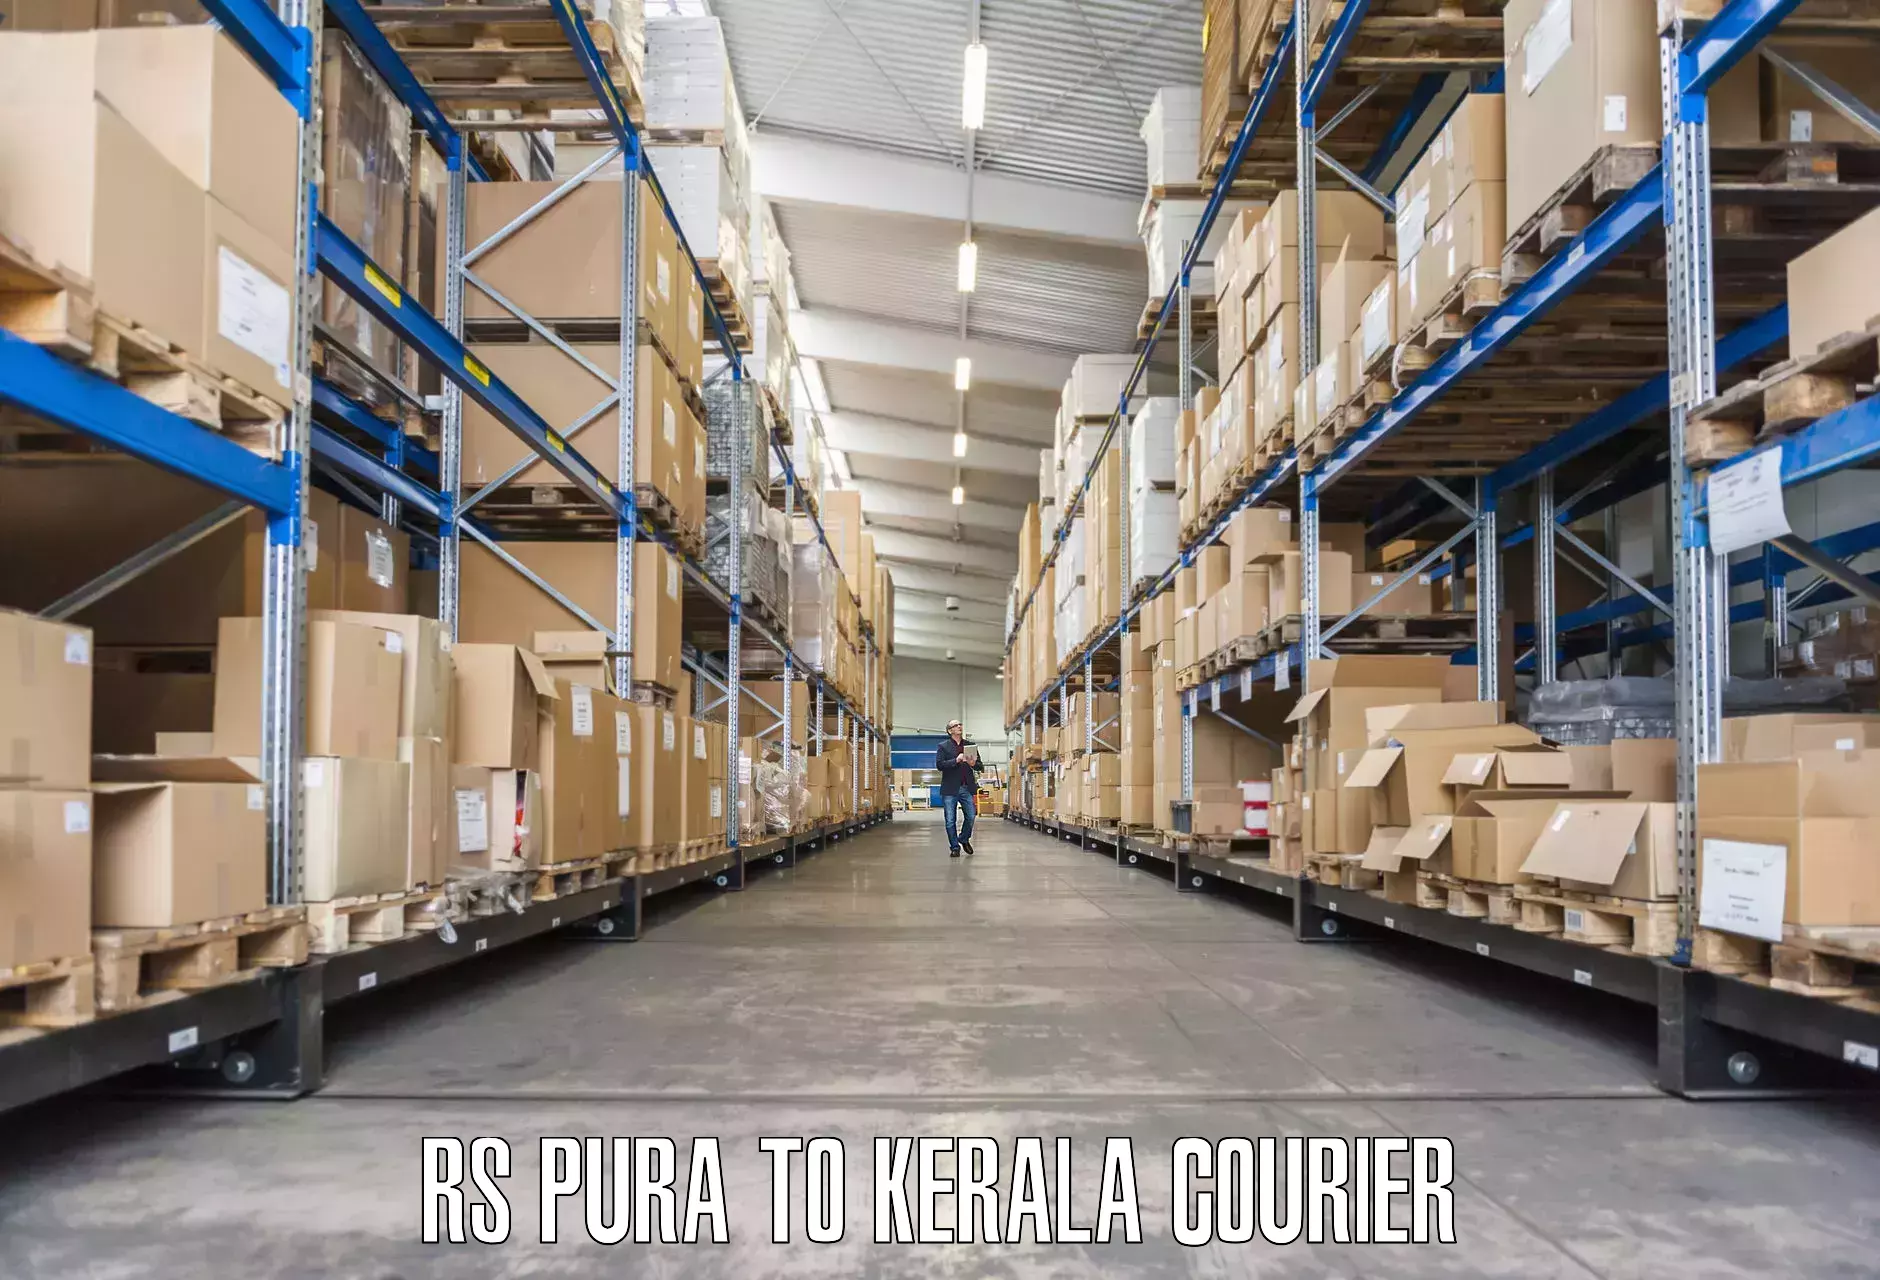 Furniture transport company RS Pura to Parappa